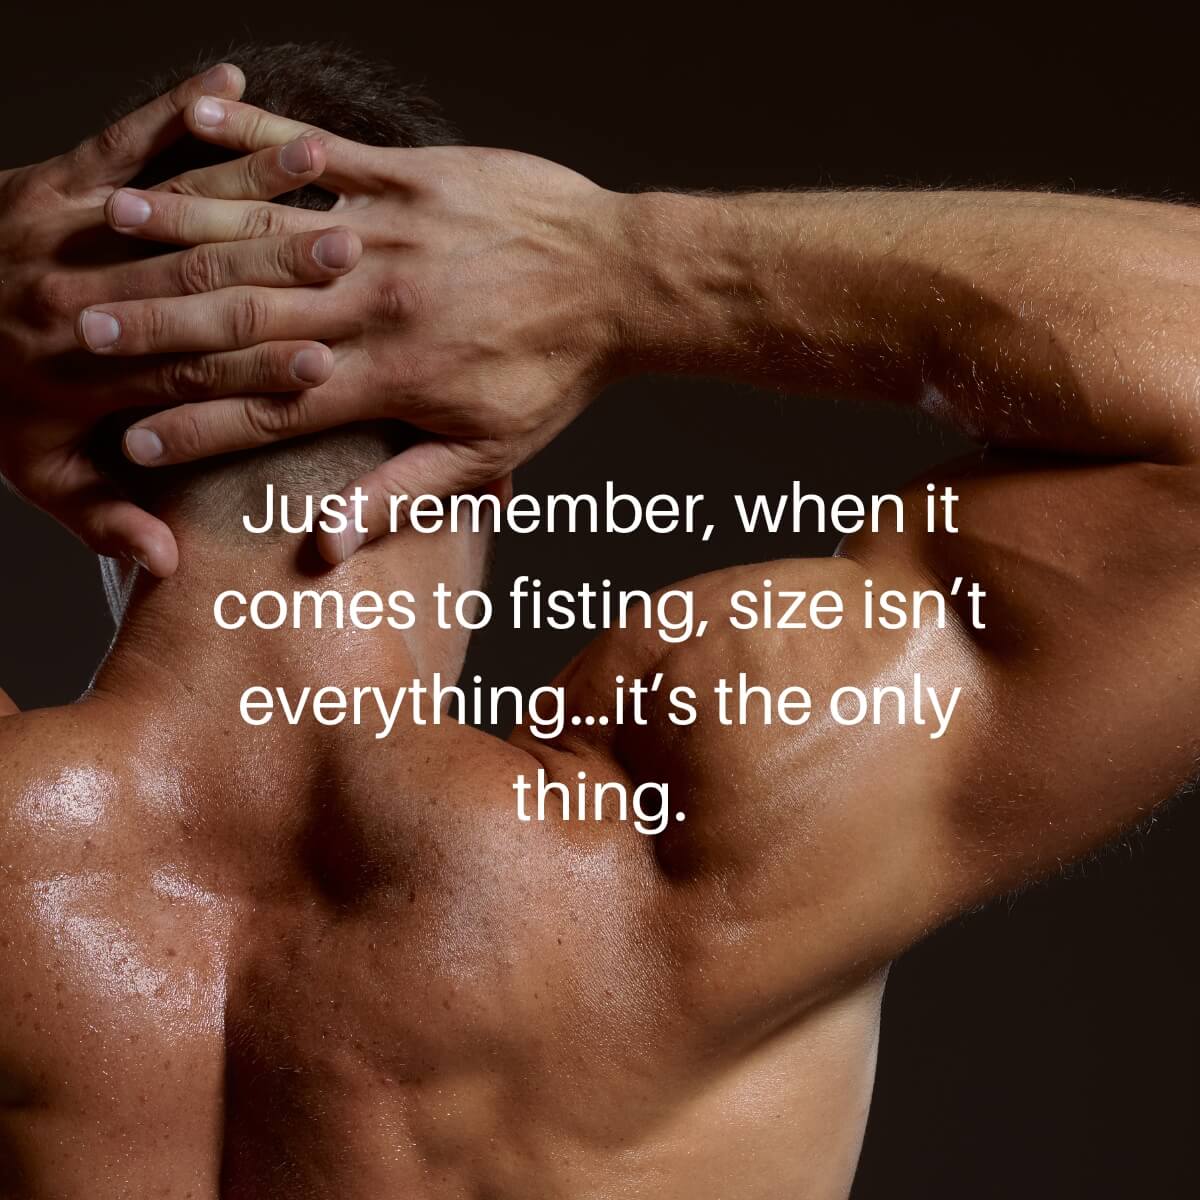 anal fisting size is everthing